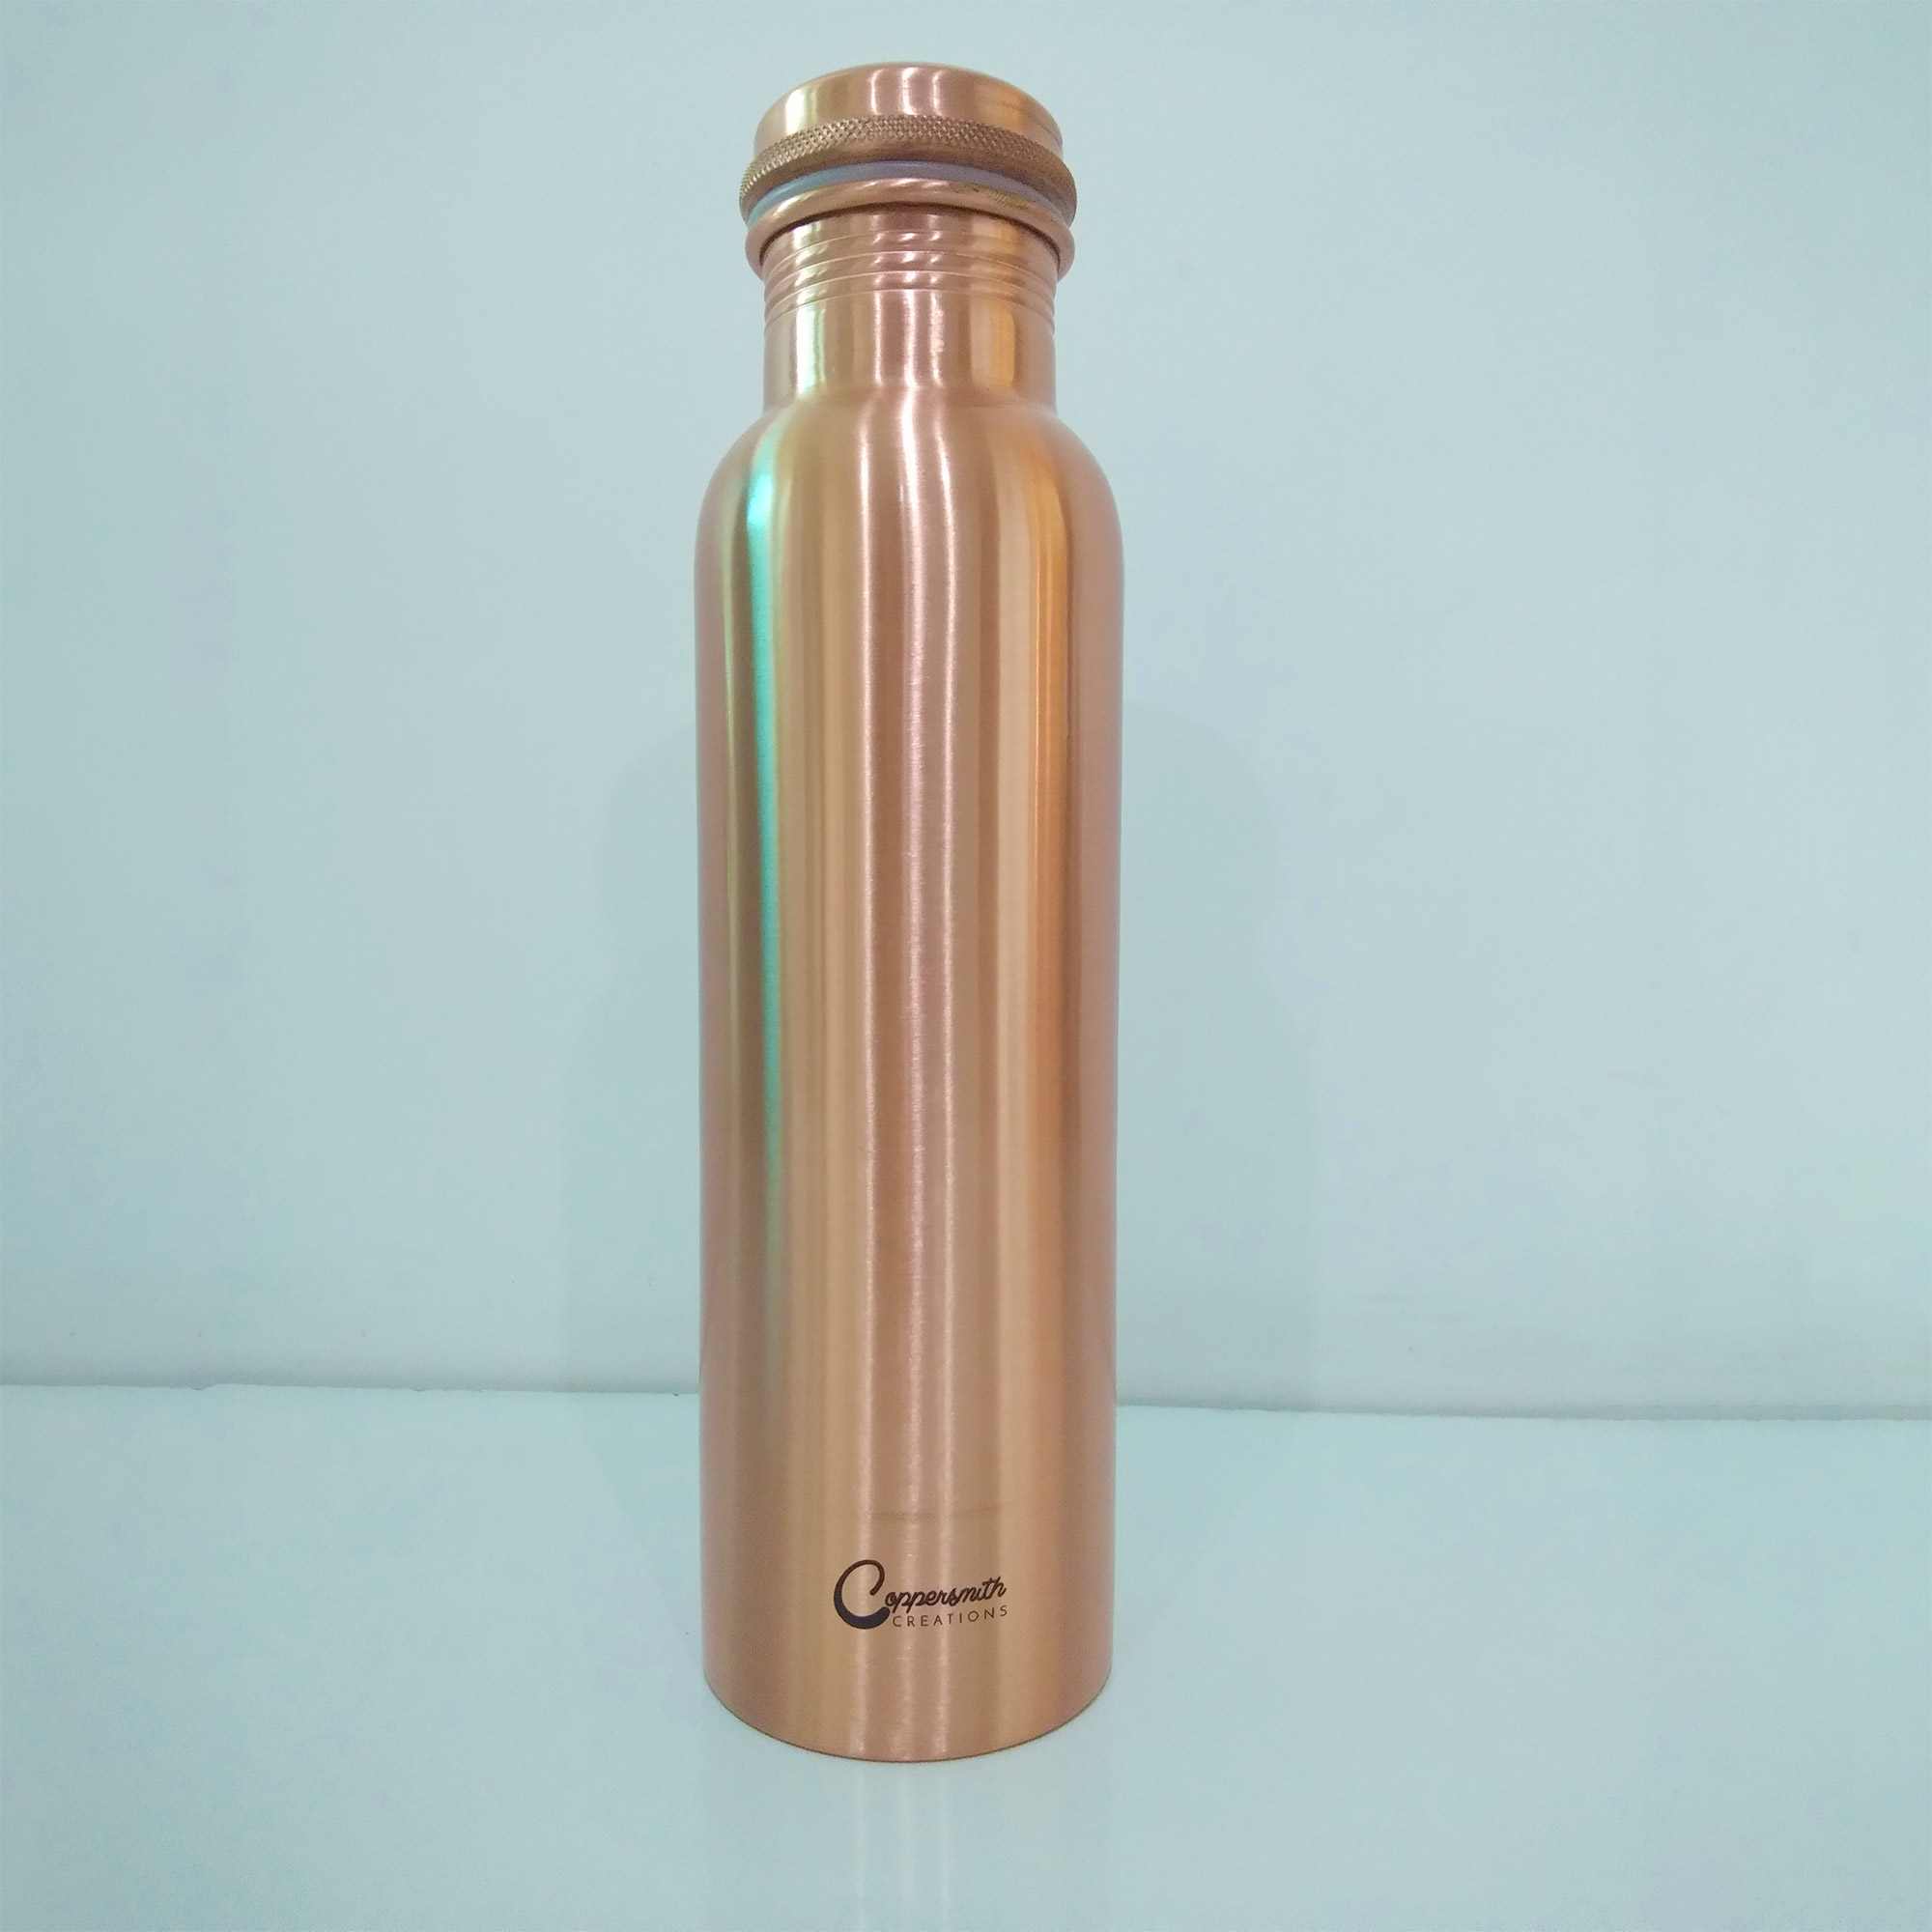 Copper bottle from Coppersmith creations